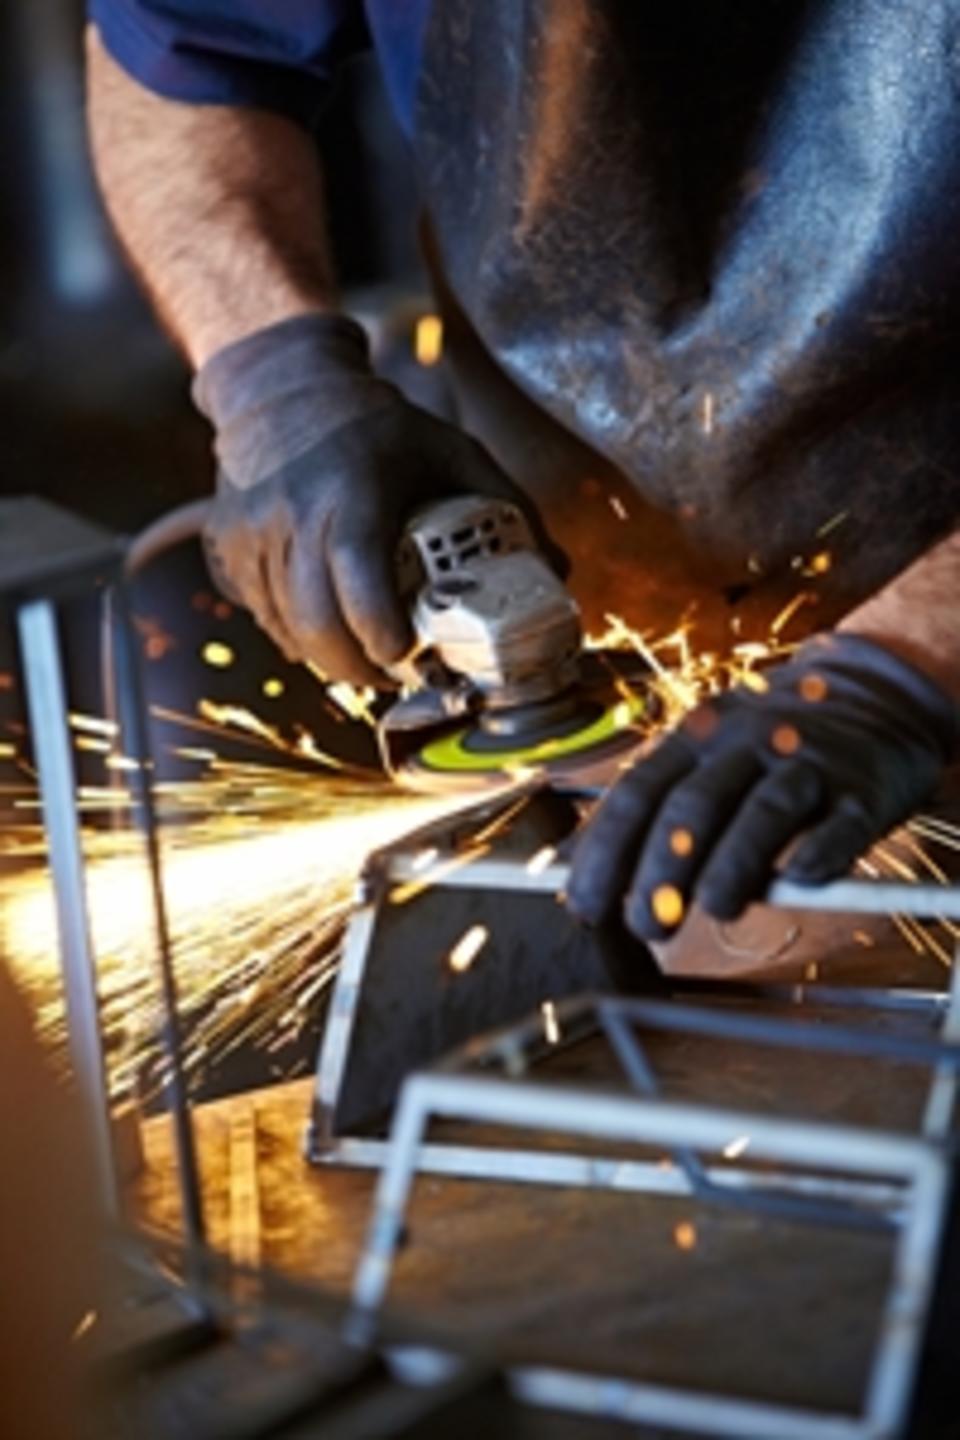 Welding Continues To Hold Promise In Jobs Technology For Students 685 513444 0 14070407 300.jpg